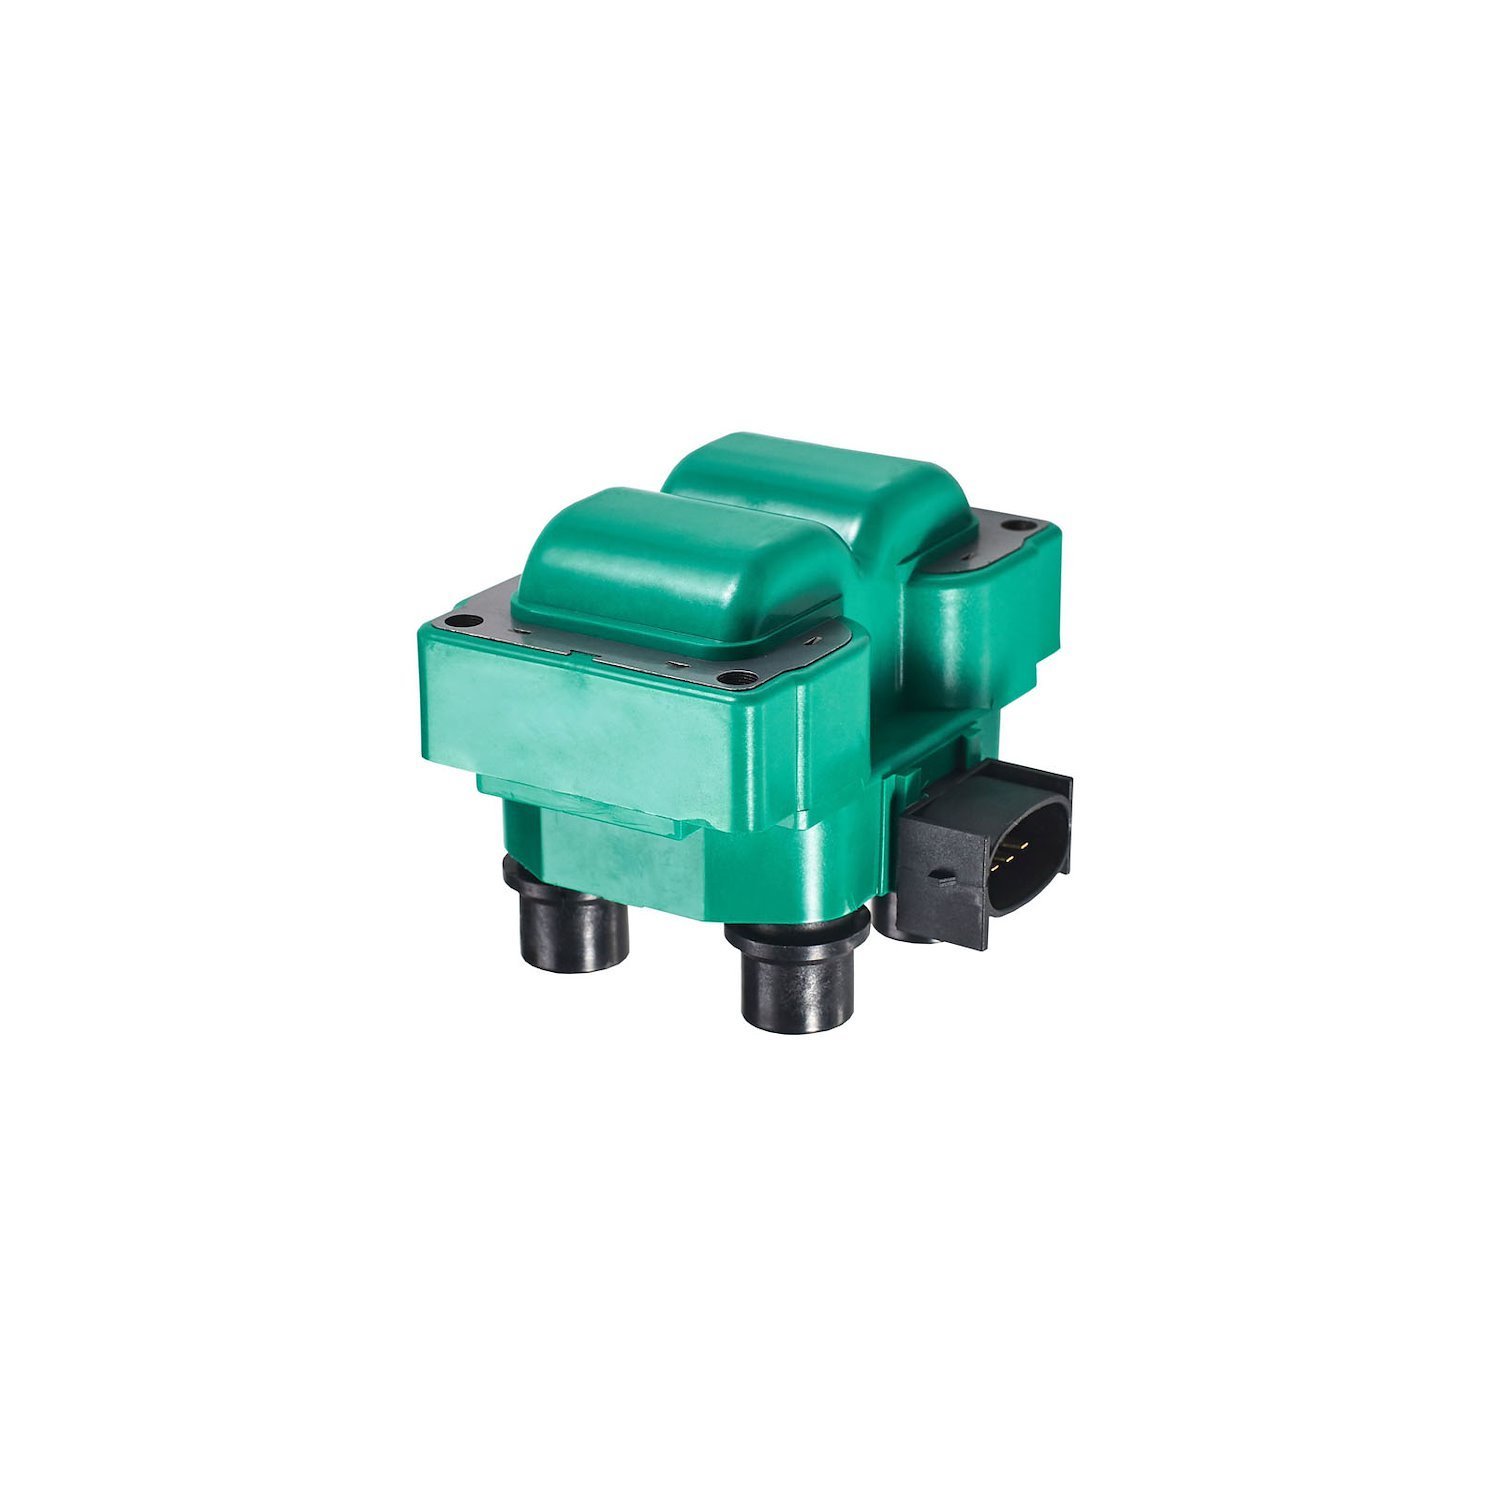 High-Performance Ignition Coil for Ford F-150/F-250, Lincoln Mercury [Green]